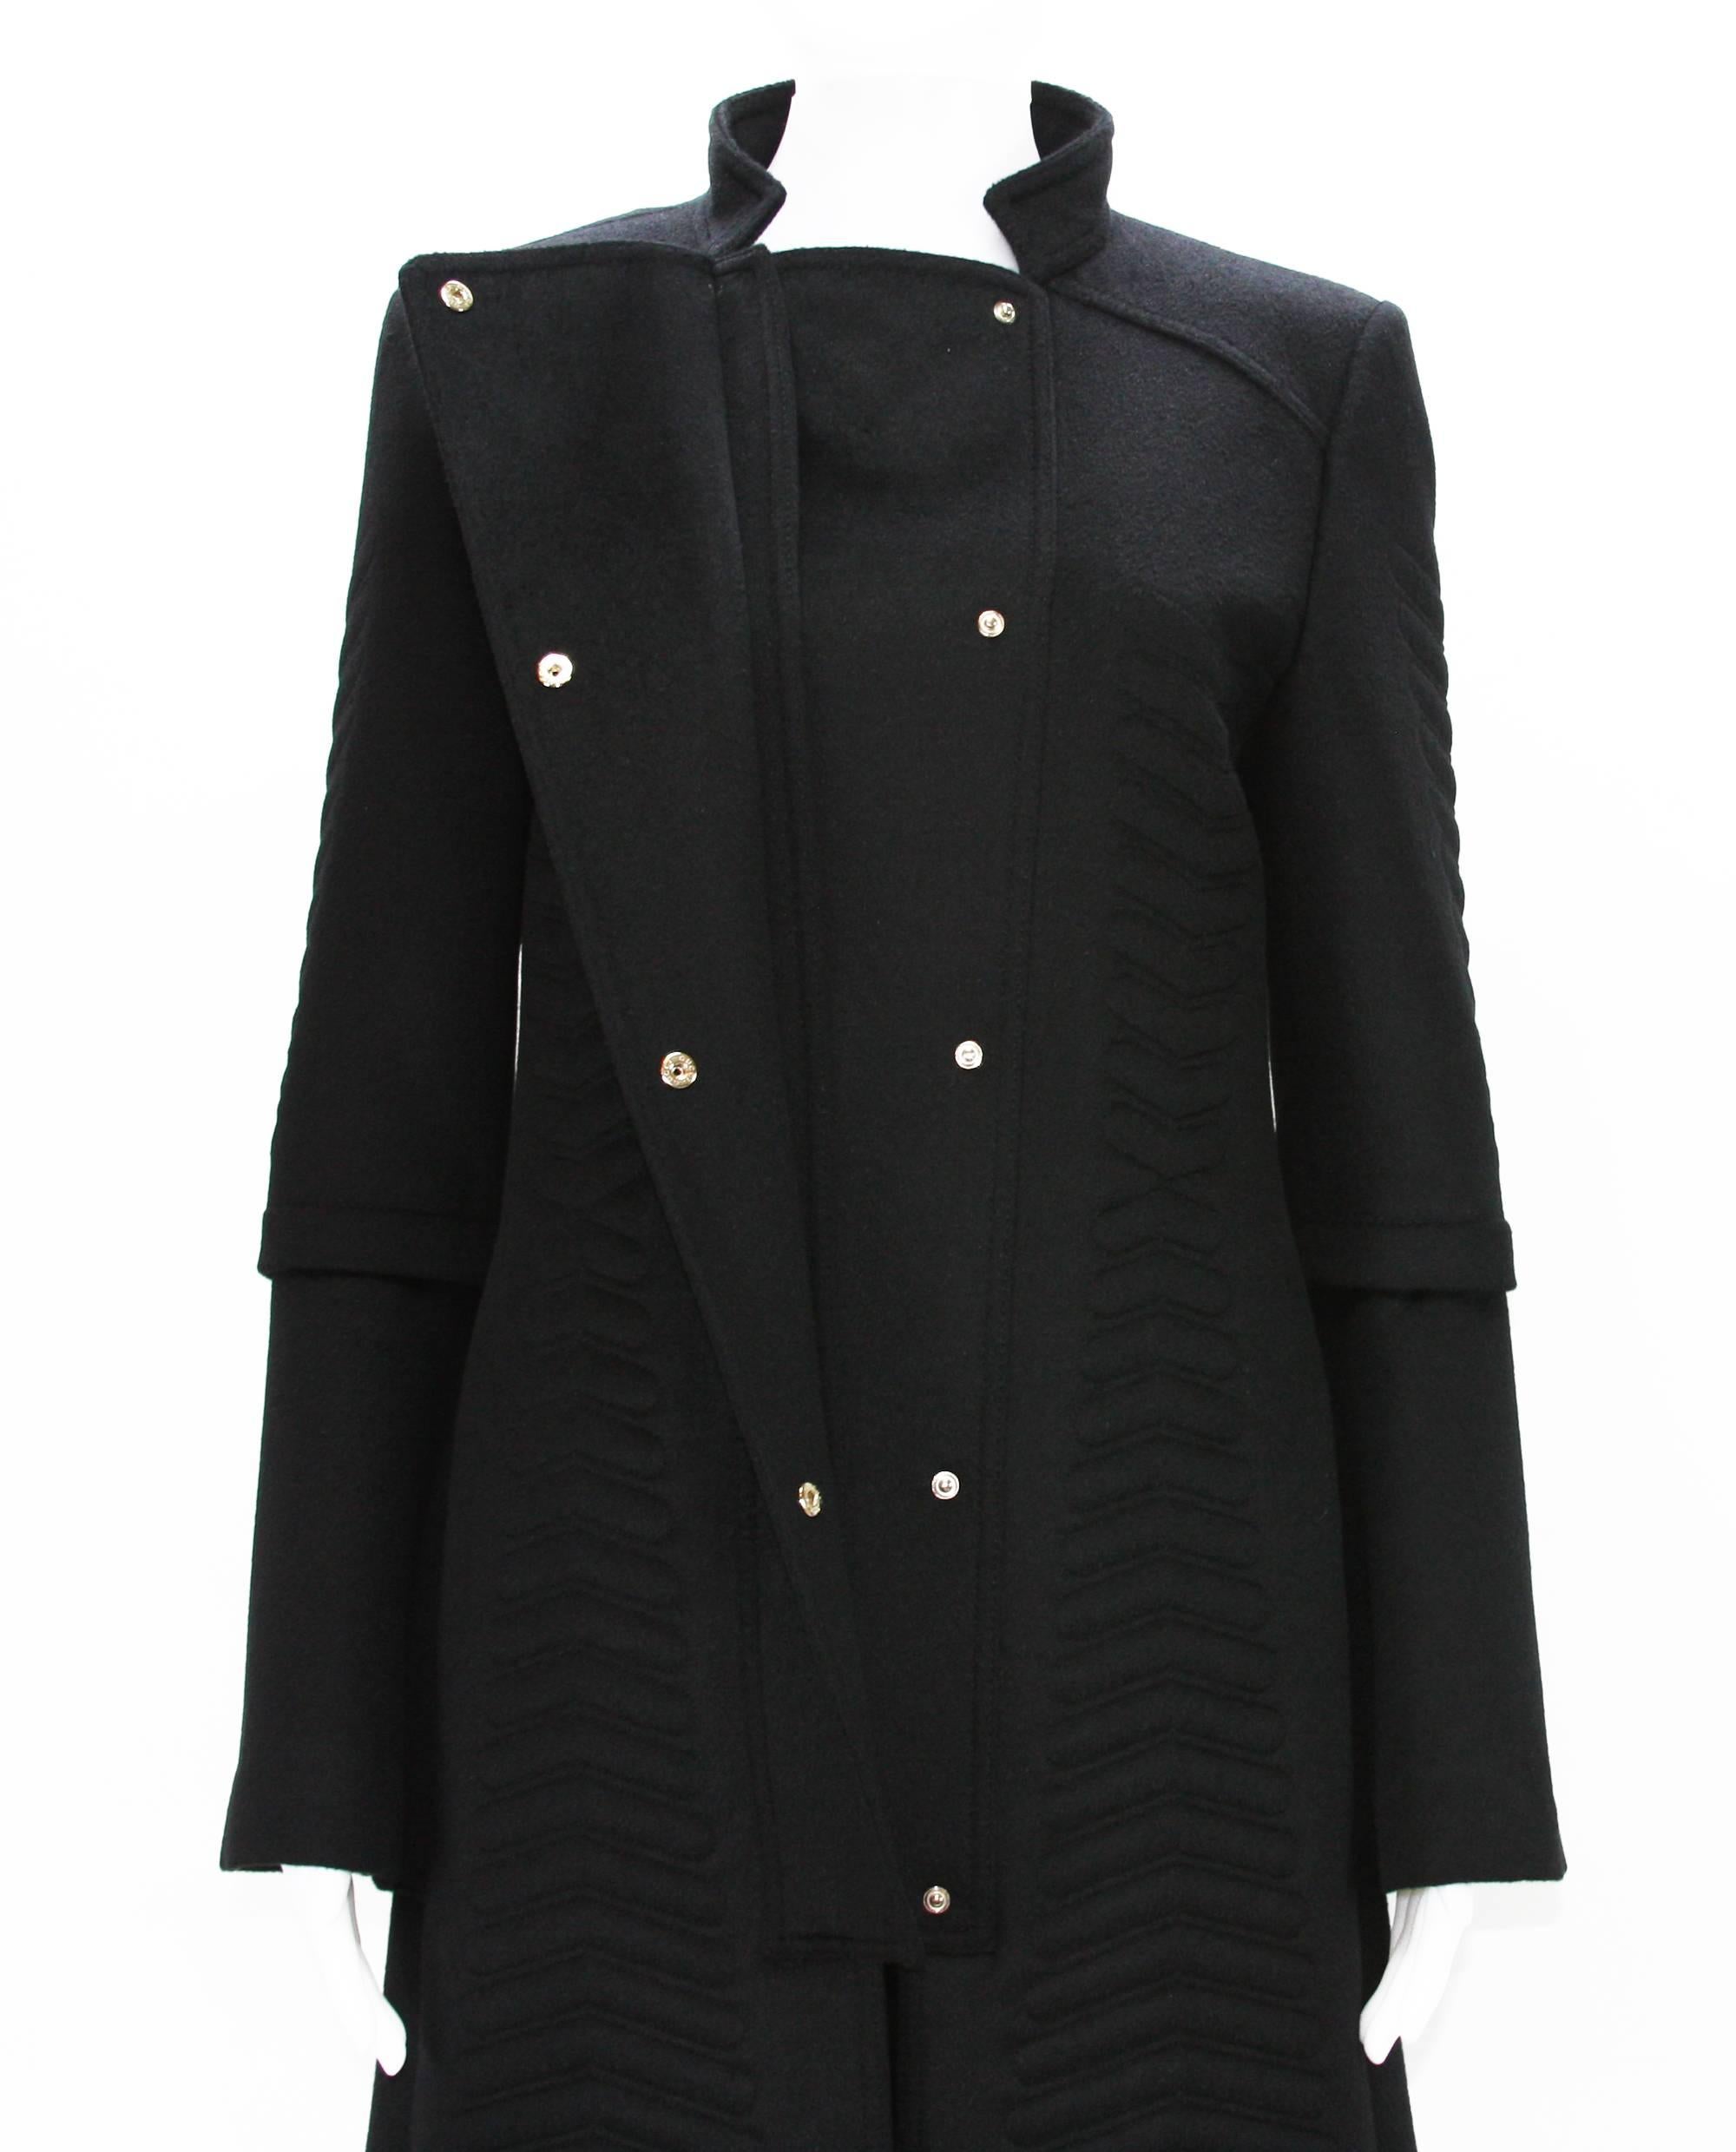 A/W 2004 Tom Ford for Gucci Chevron Quilting Black Angora Wool Coat It 44 - US 8 2